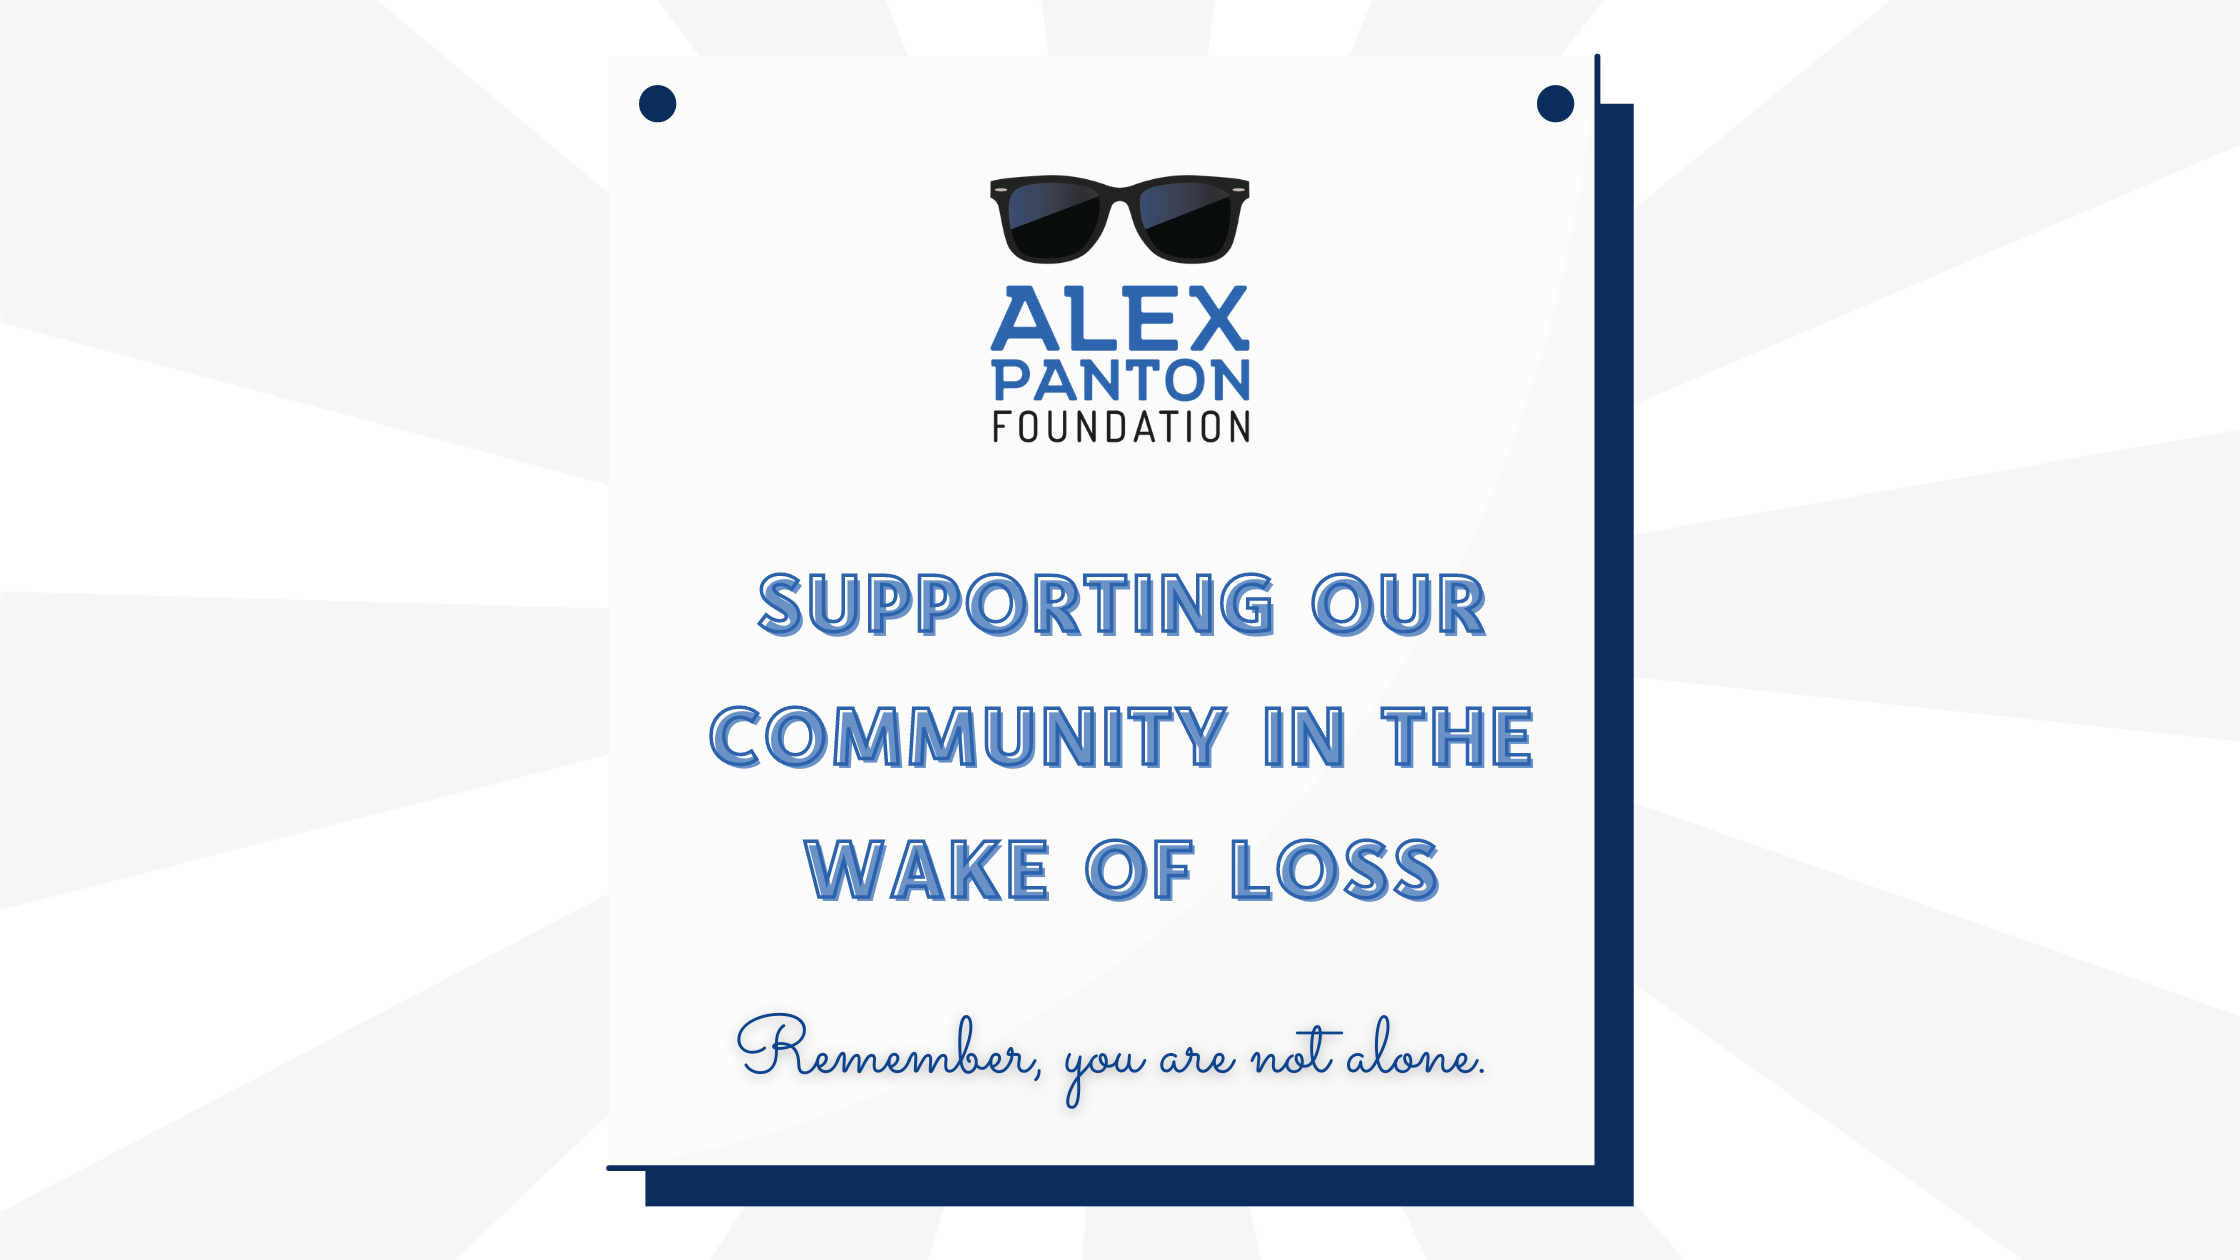 Alex Panton Foundation highlights mental health support and resources available to the Cayman Islands community